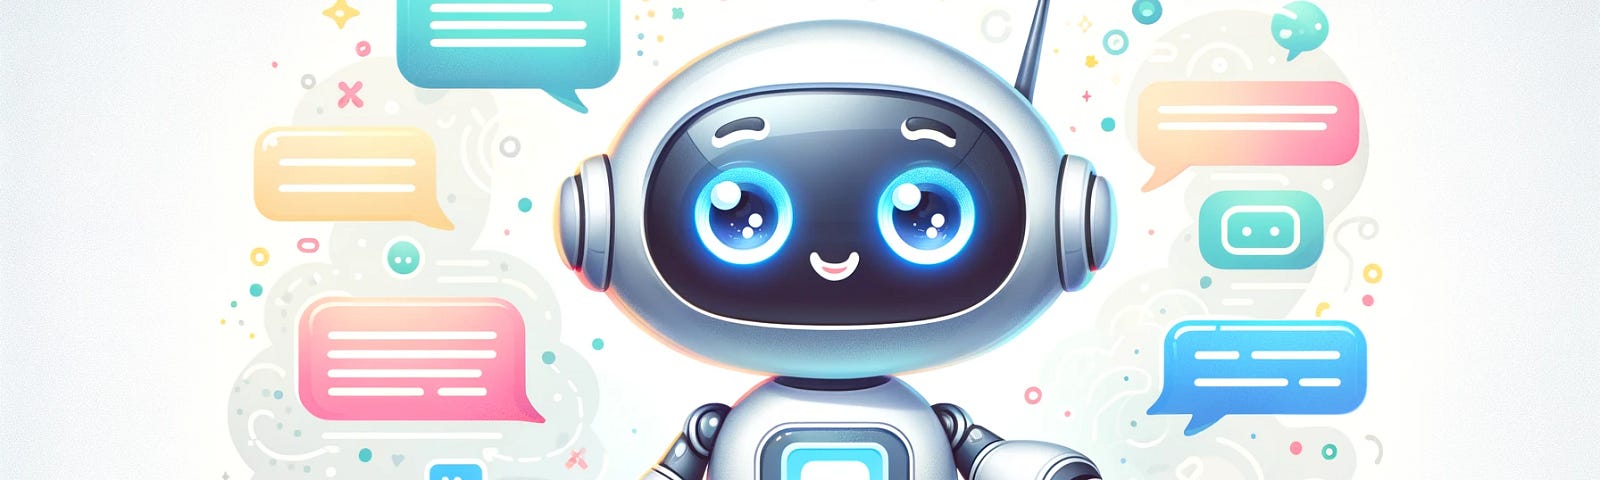 A cartoon-style illustration of a cheerful robot with expressive eyes and a smiling face, surrounded by colorful chat bubbles against a light, bright background.